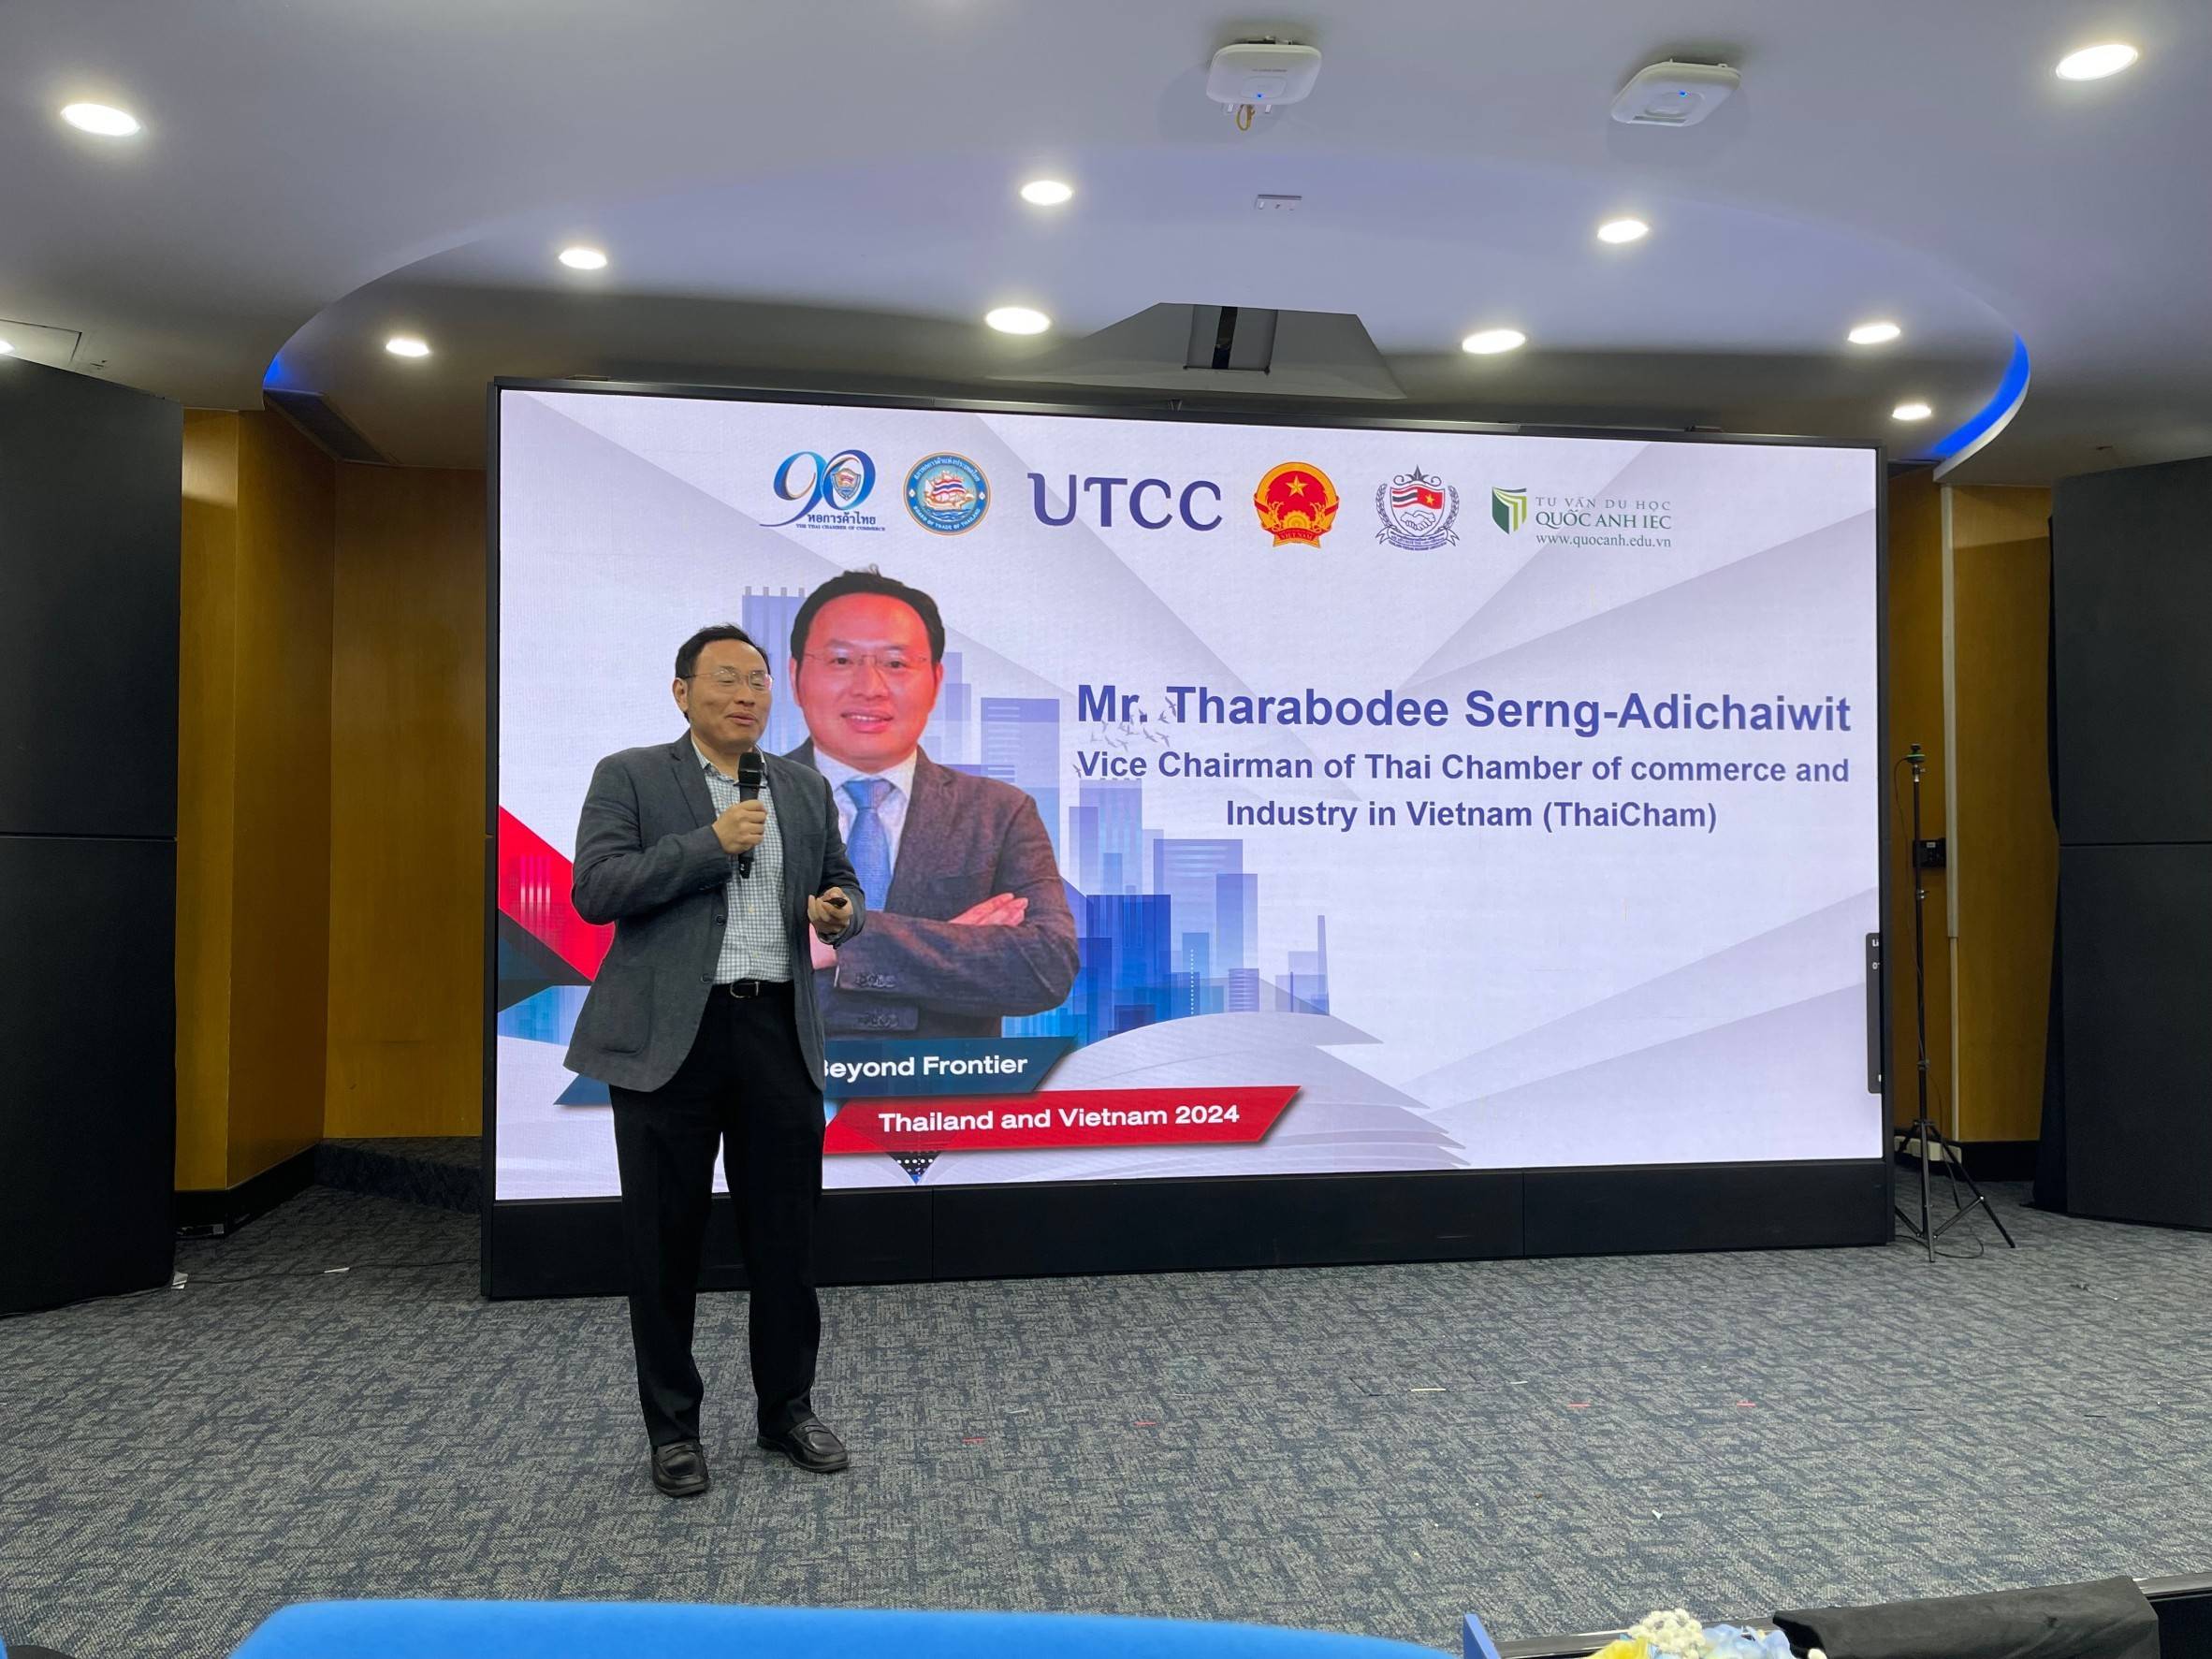 Mr. Tharabodee was presenting about “Demand on workforce for Thai Business in Vietnam”. 